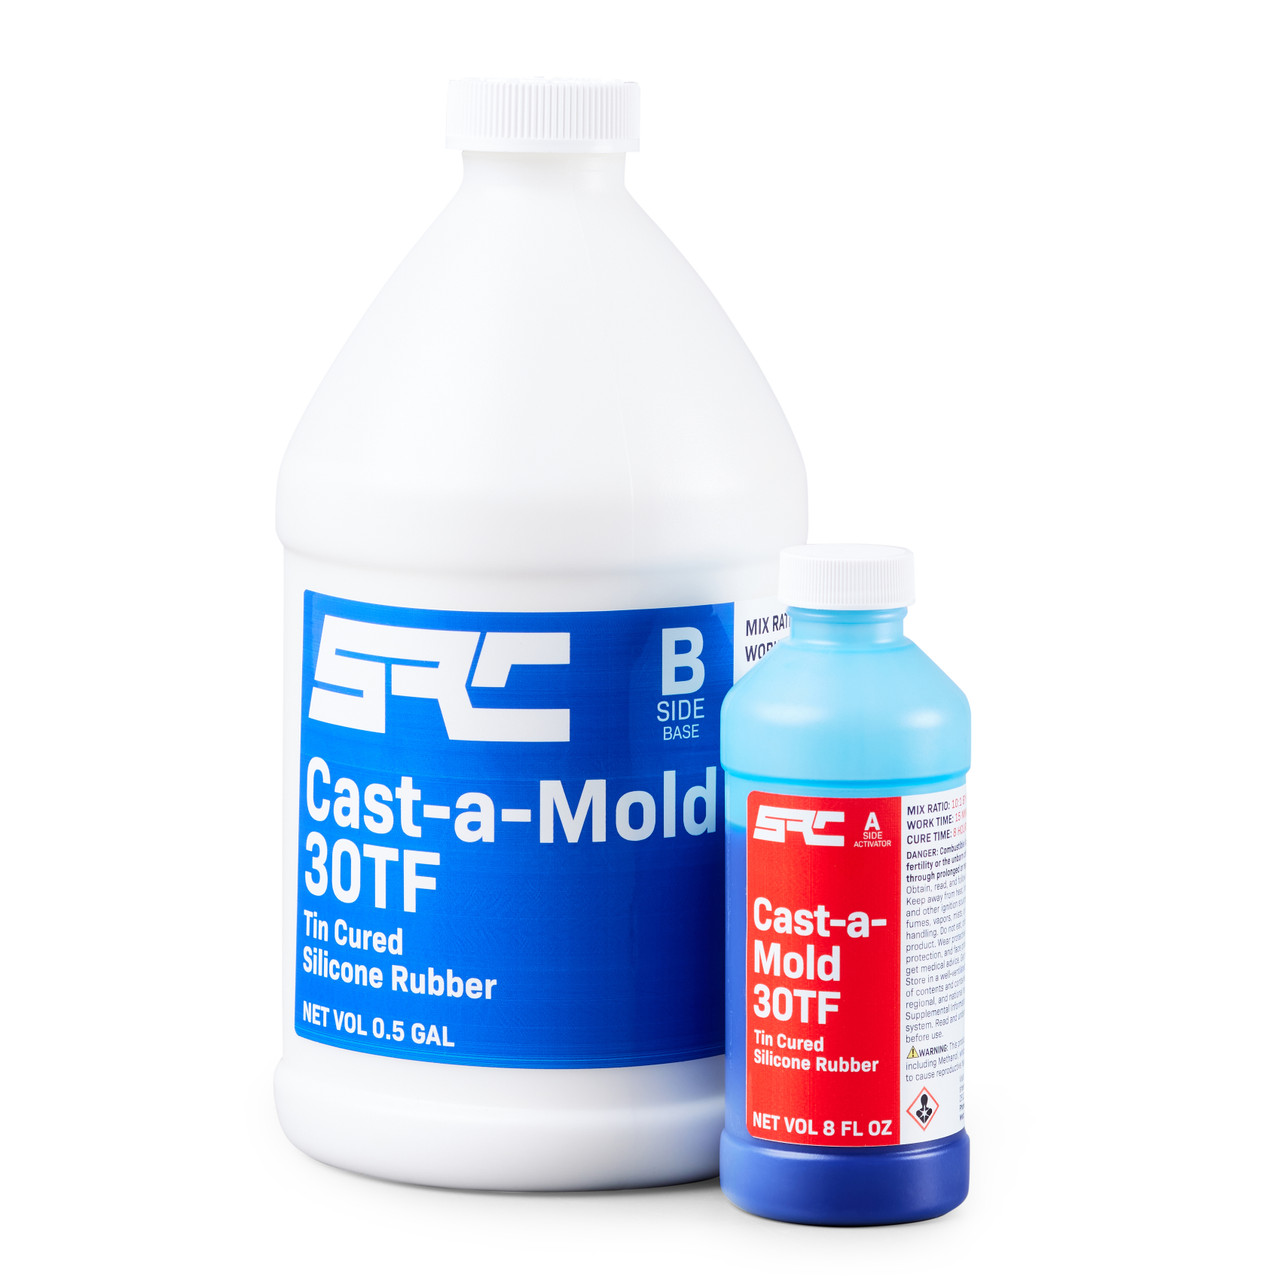 Mold Max™ 20 Silicone Mold Rubber Product Information